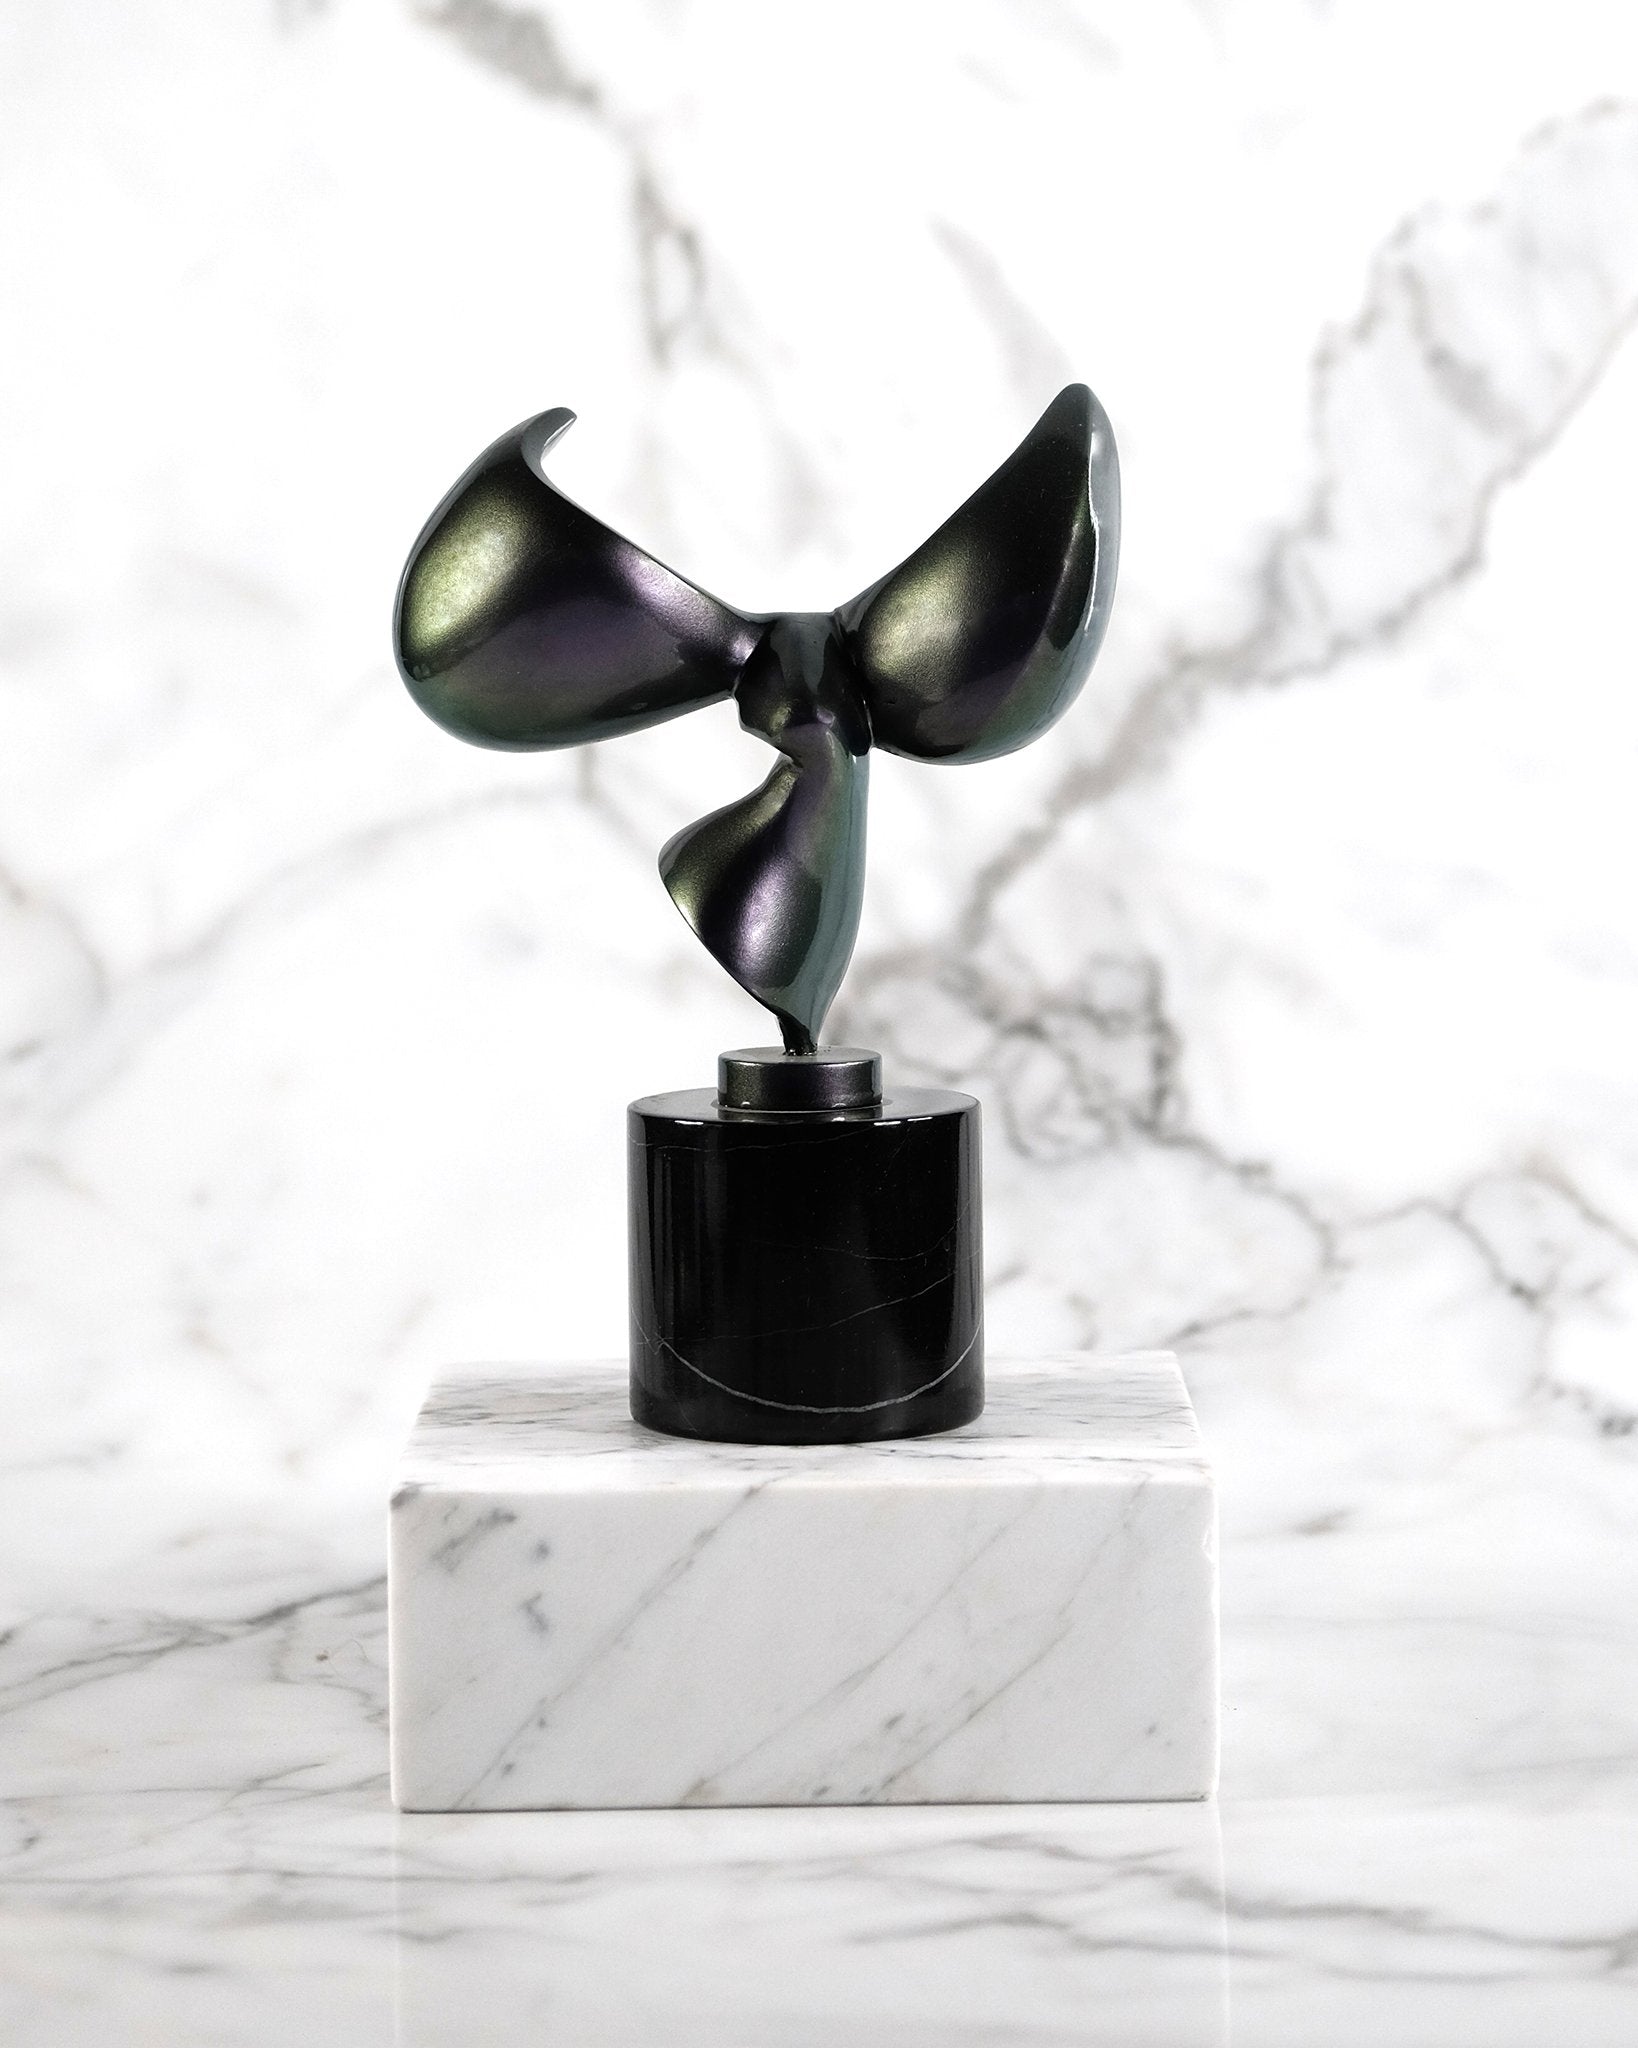 Green-to-Purple Holographic Lacquered Aluminum Sculpture on Marble Base (1)